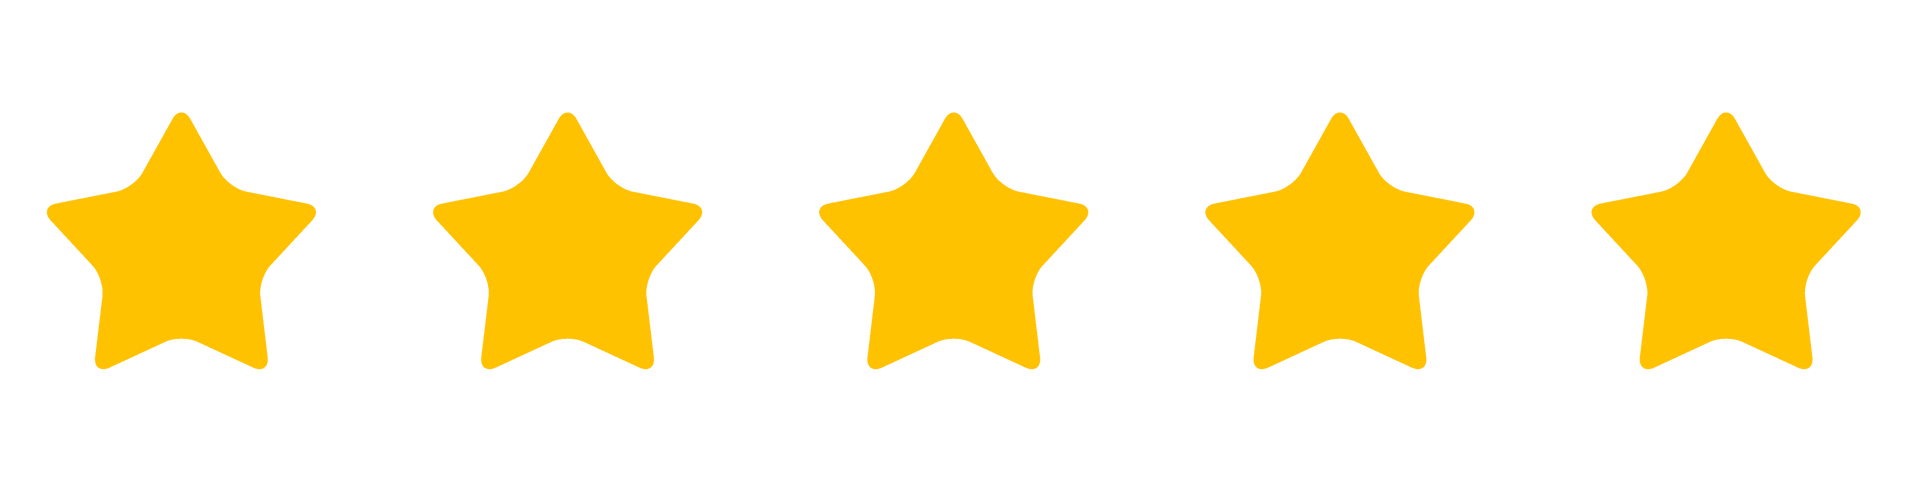 A row of five yellow stars on a white background.